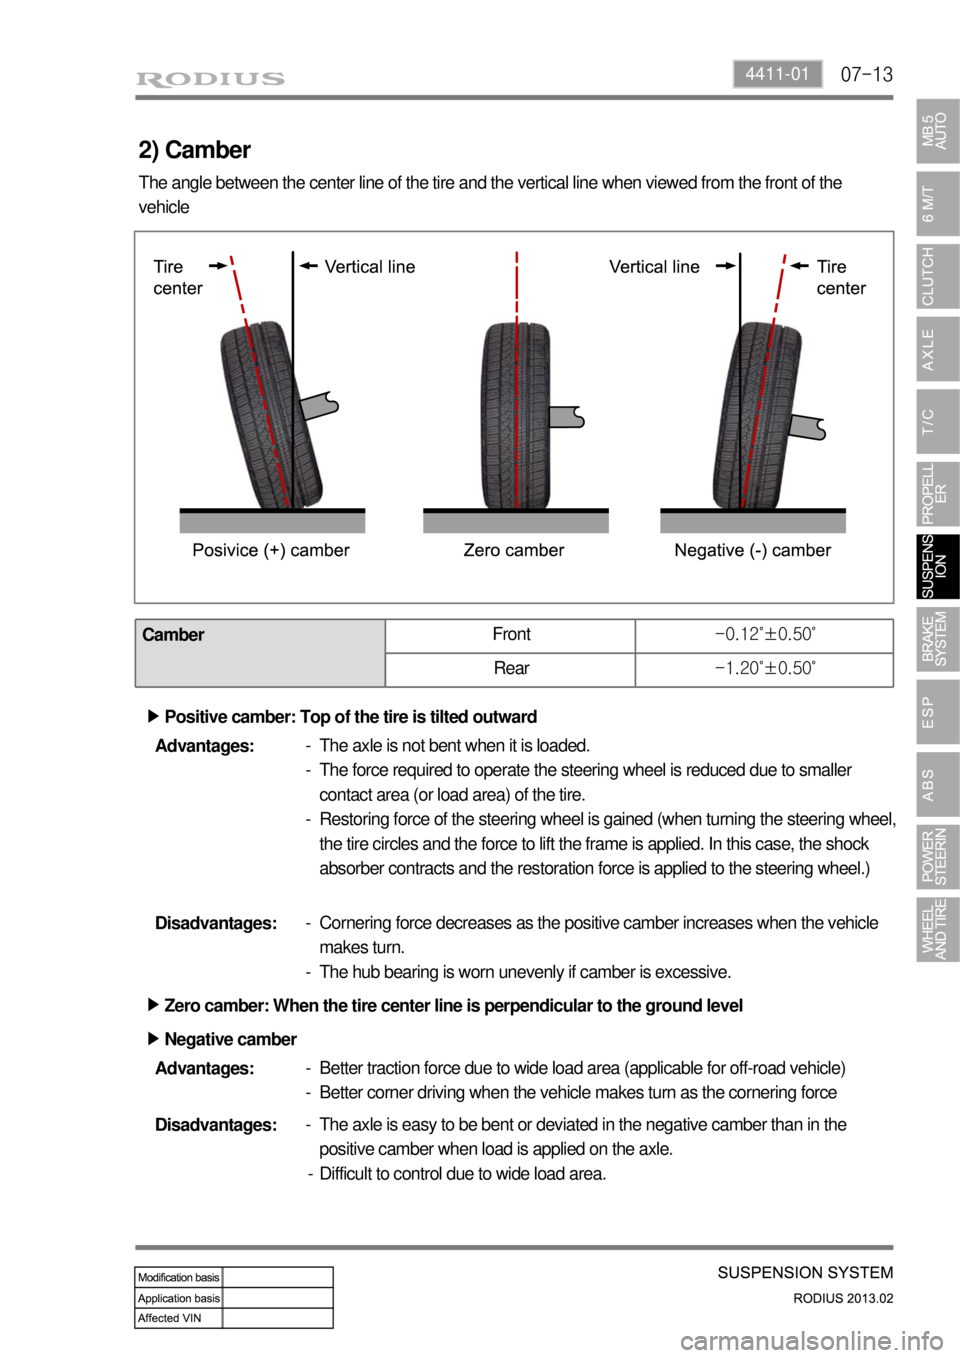 SSANGYONG TURISMO 2013  Service Manual 07-134411-01
2) Camber
The angle between the center line of the tire and the vertical line when viewed from the front of the 
vehicle
CamberFront-0.12˚±0.50˚
Rear-1.20˚±0.50˚
Zero camber: When t